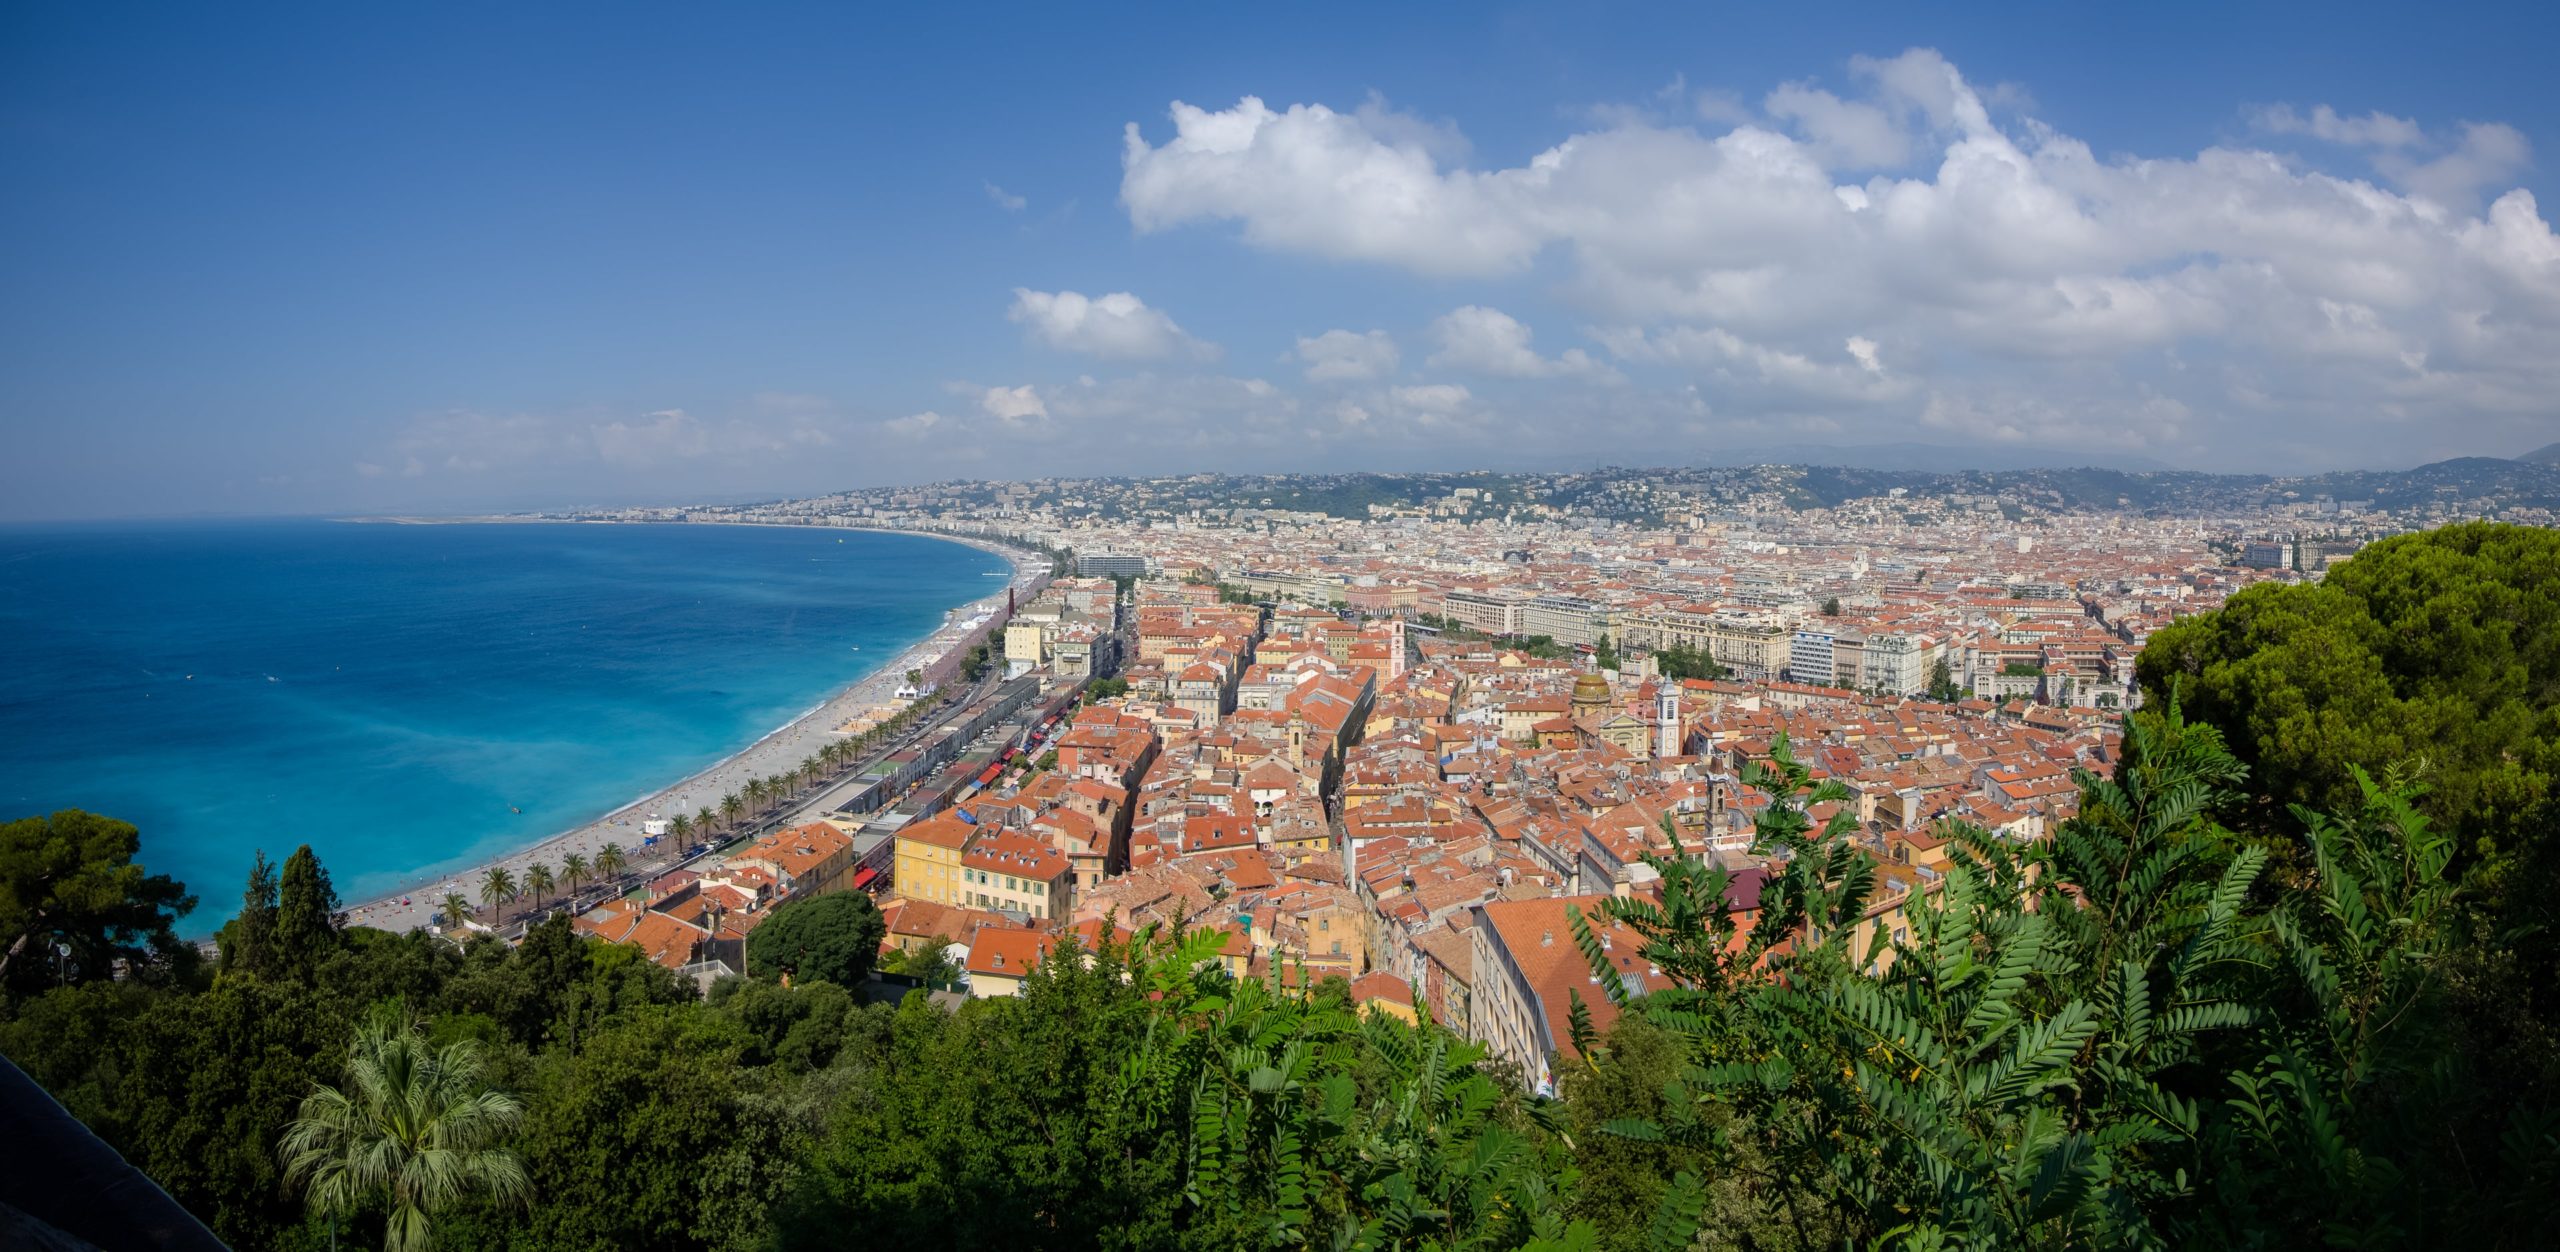 Private Tour of Nice with your own chauffeur/guide